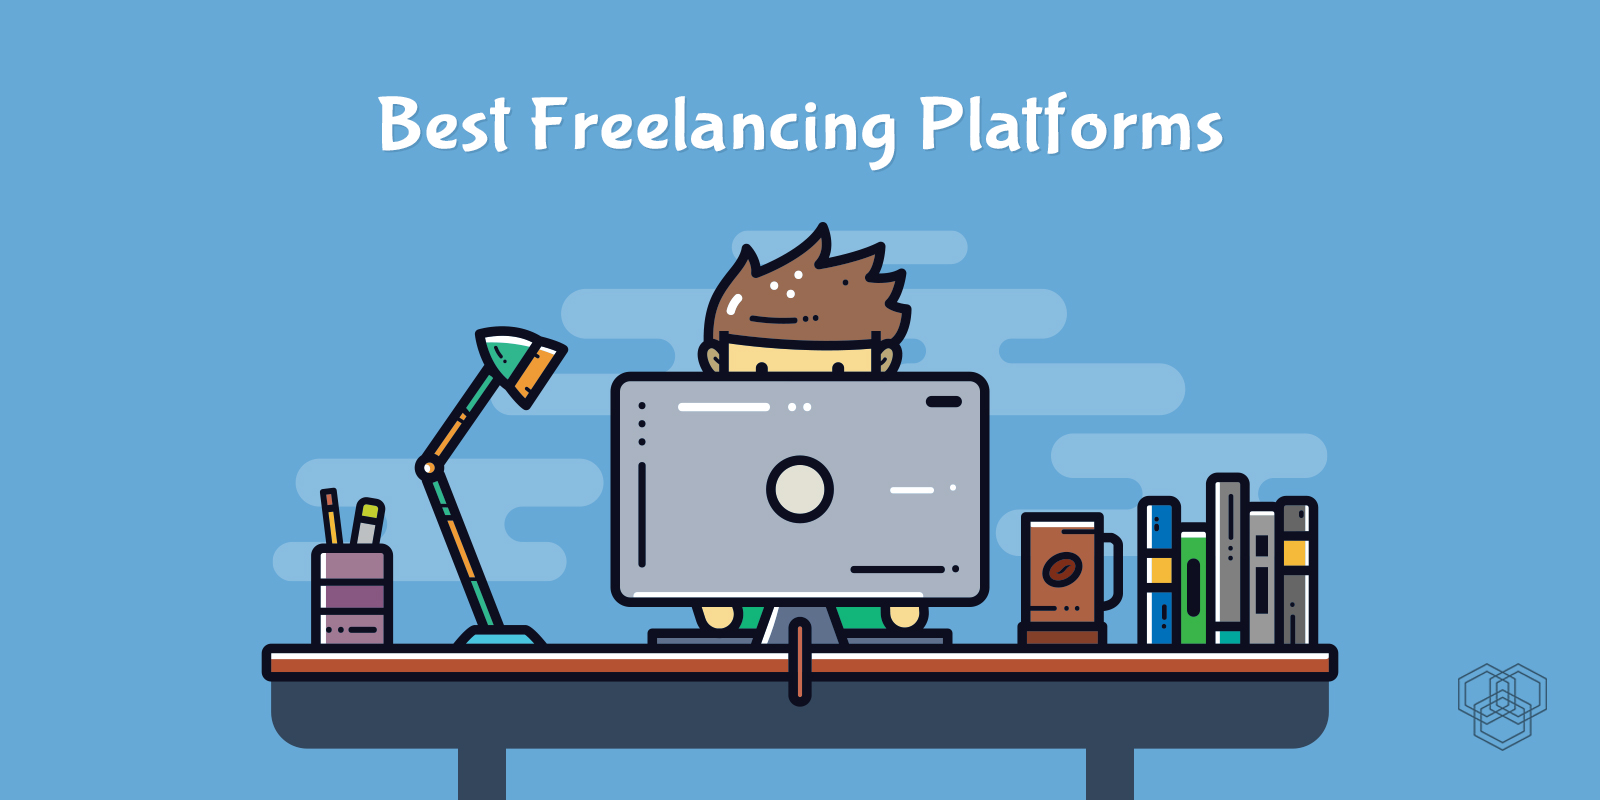 A featured image of an illustrated character working as a freelancer, best freelancing websites for Pakistani freelancers